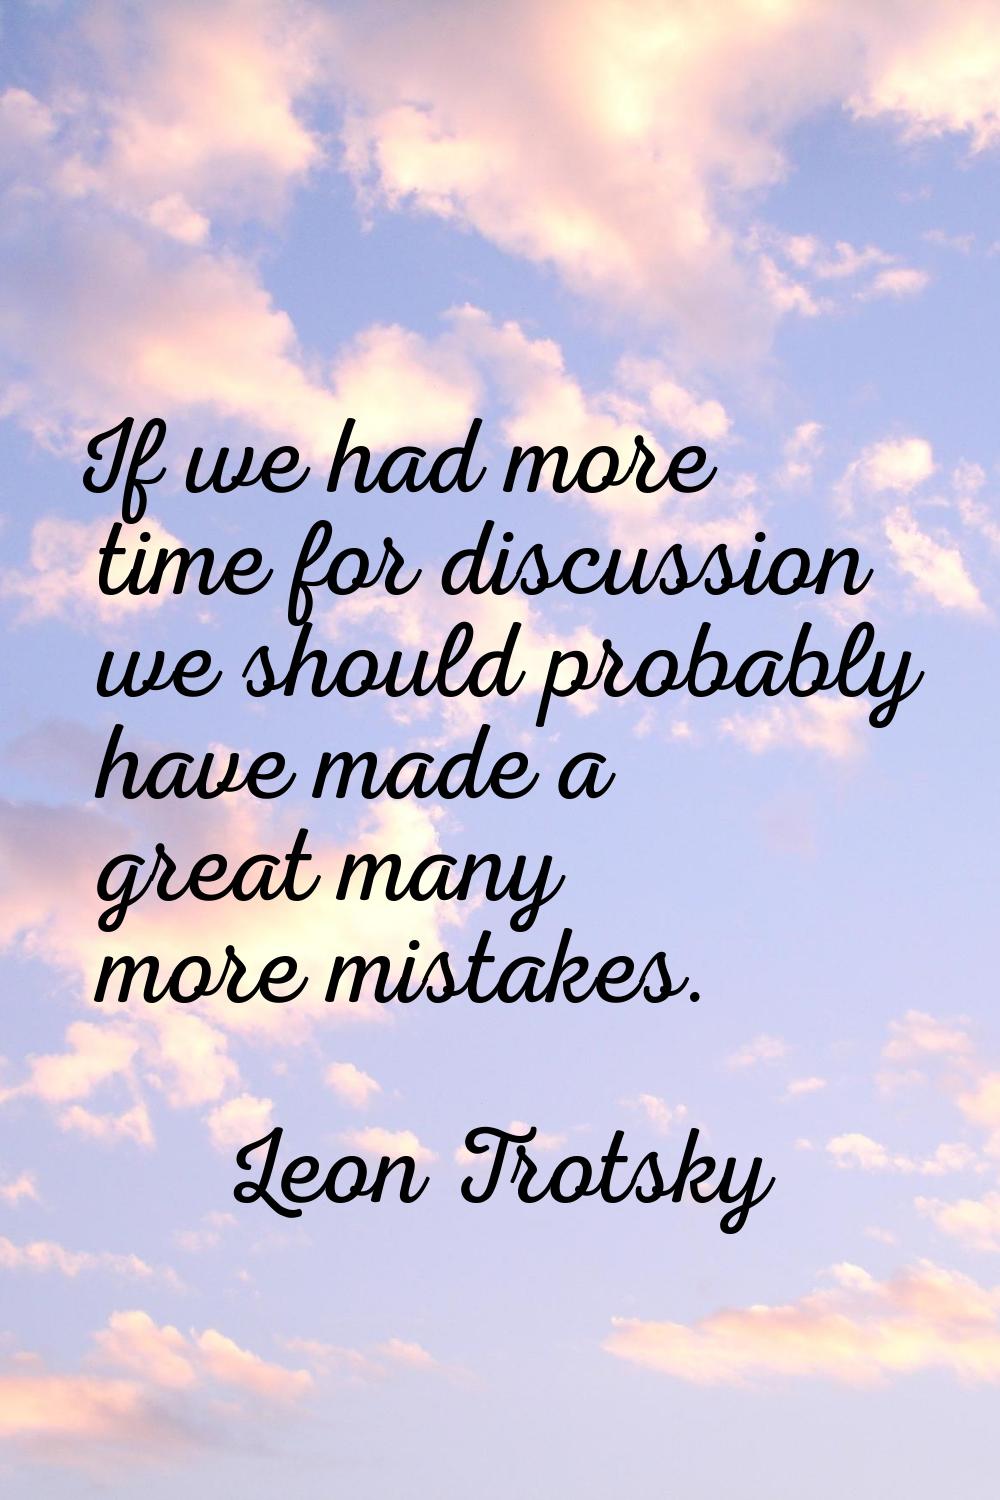 If we had more time for discussion we should probably have made a great many more mistakes.